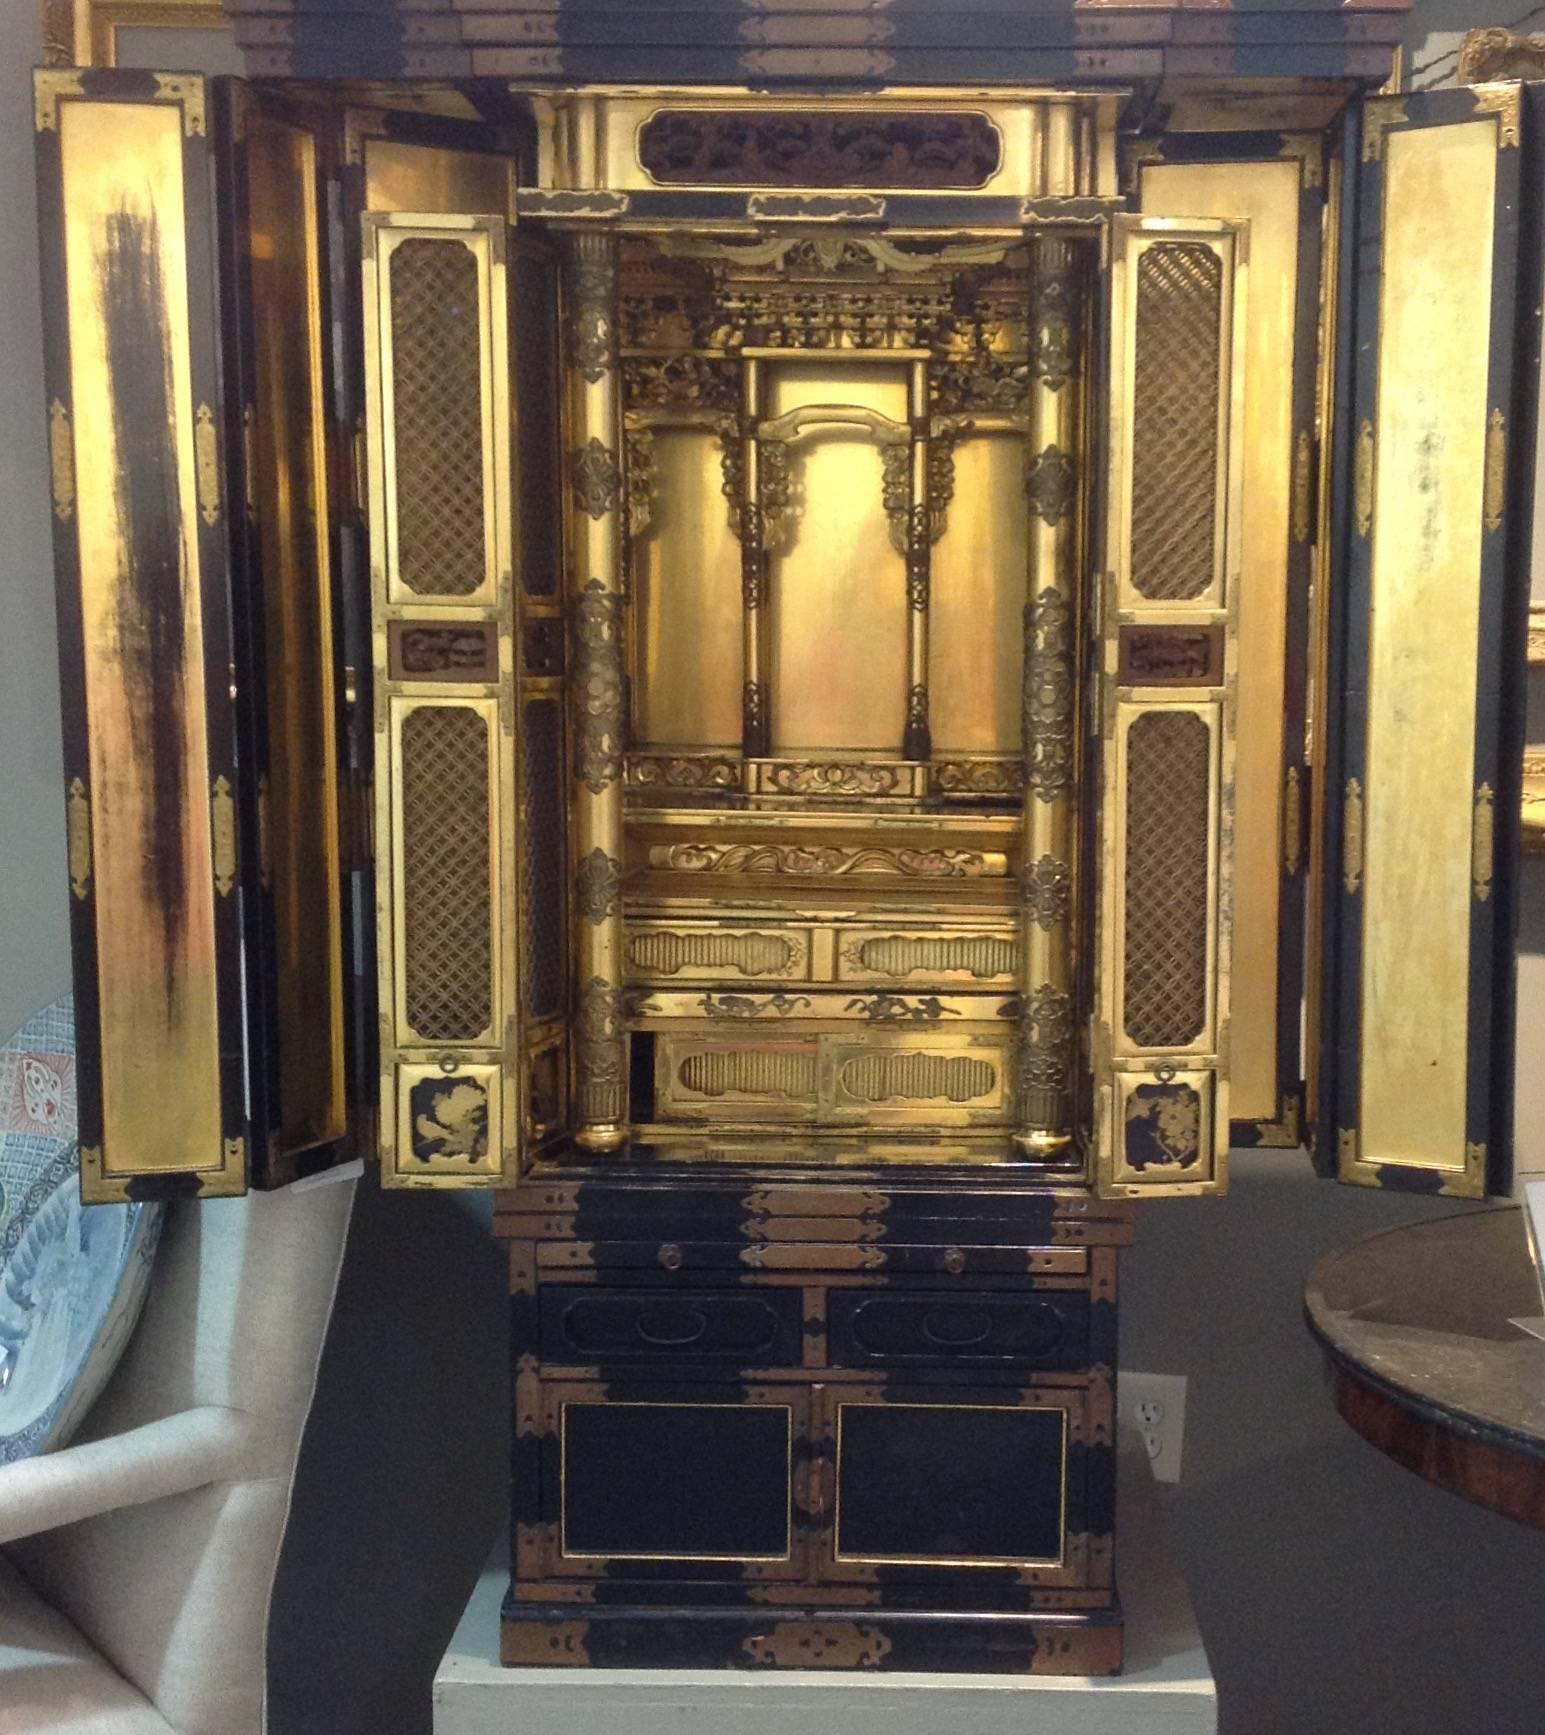 Antique Japanese lacquer Butsudan which is a home altar or shrine with heavily gilded interior, circa 19th century. Two sets of doors fold open to reveal an elaborate gilded fitted interior.
Butsudan